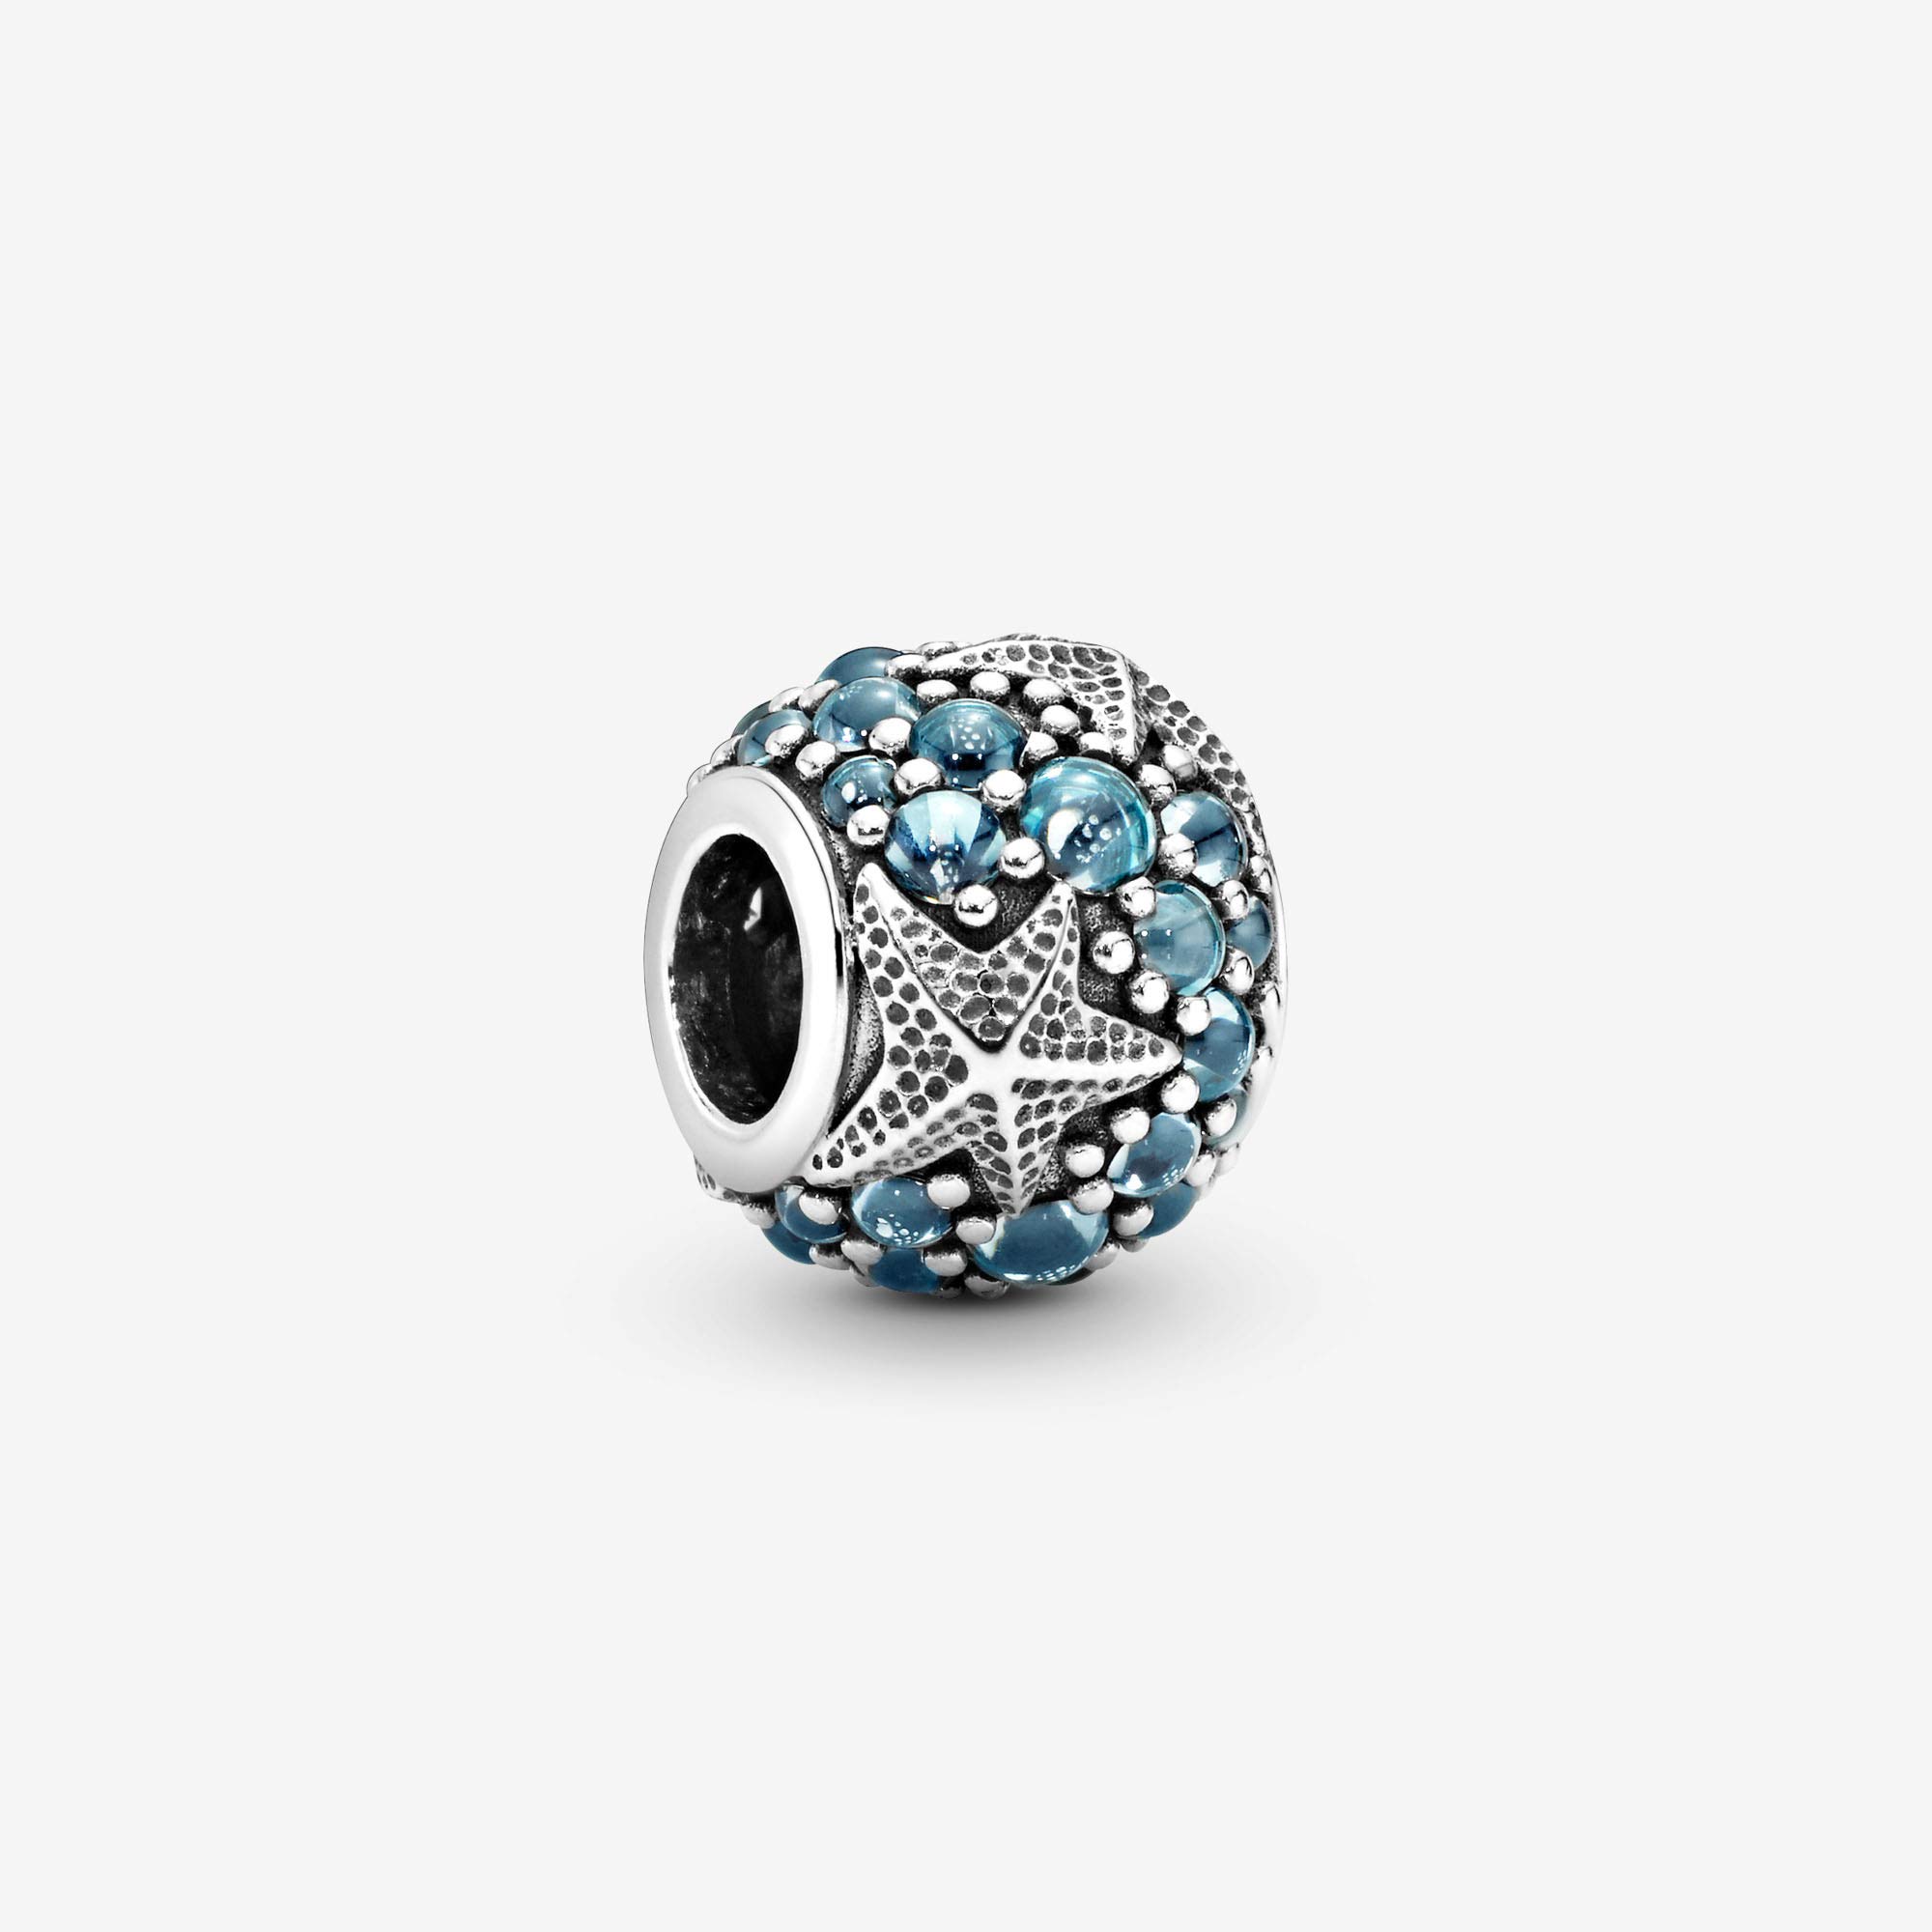 PANDORA Jewelry Pave Ocean and Starfish Cubic Zirconia Charm in Sterling Silver